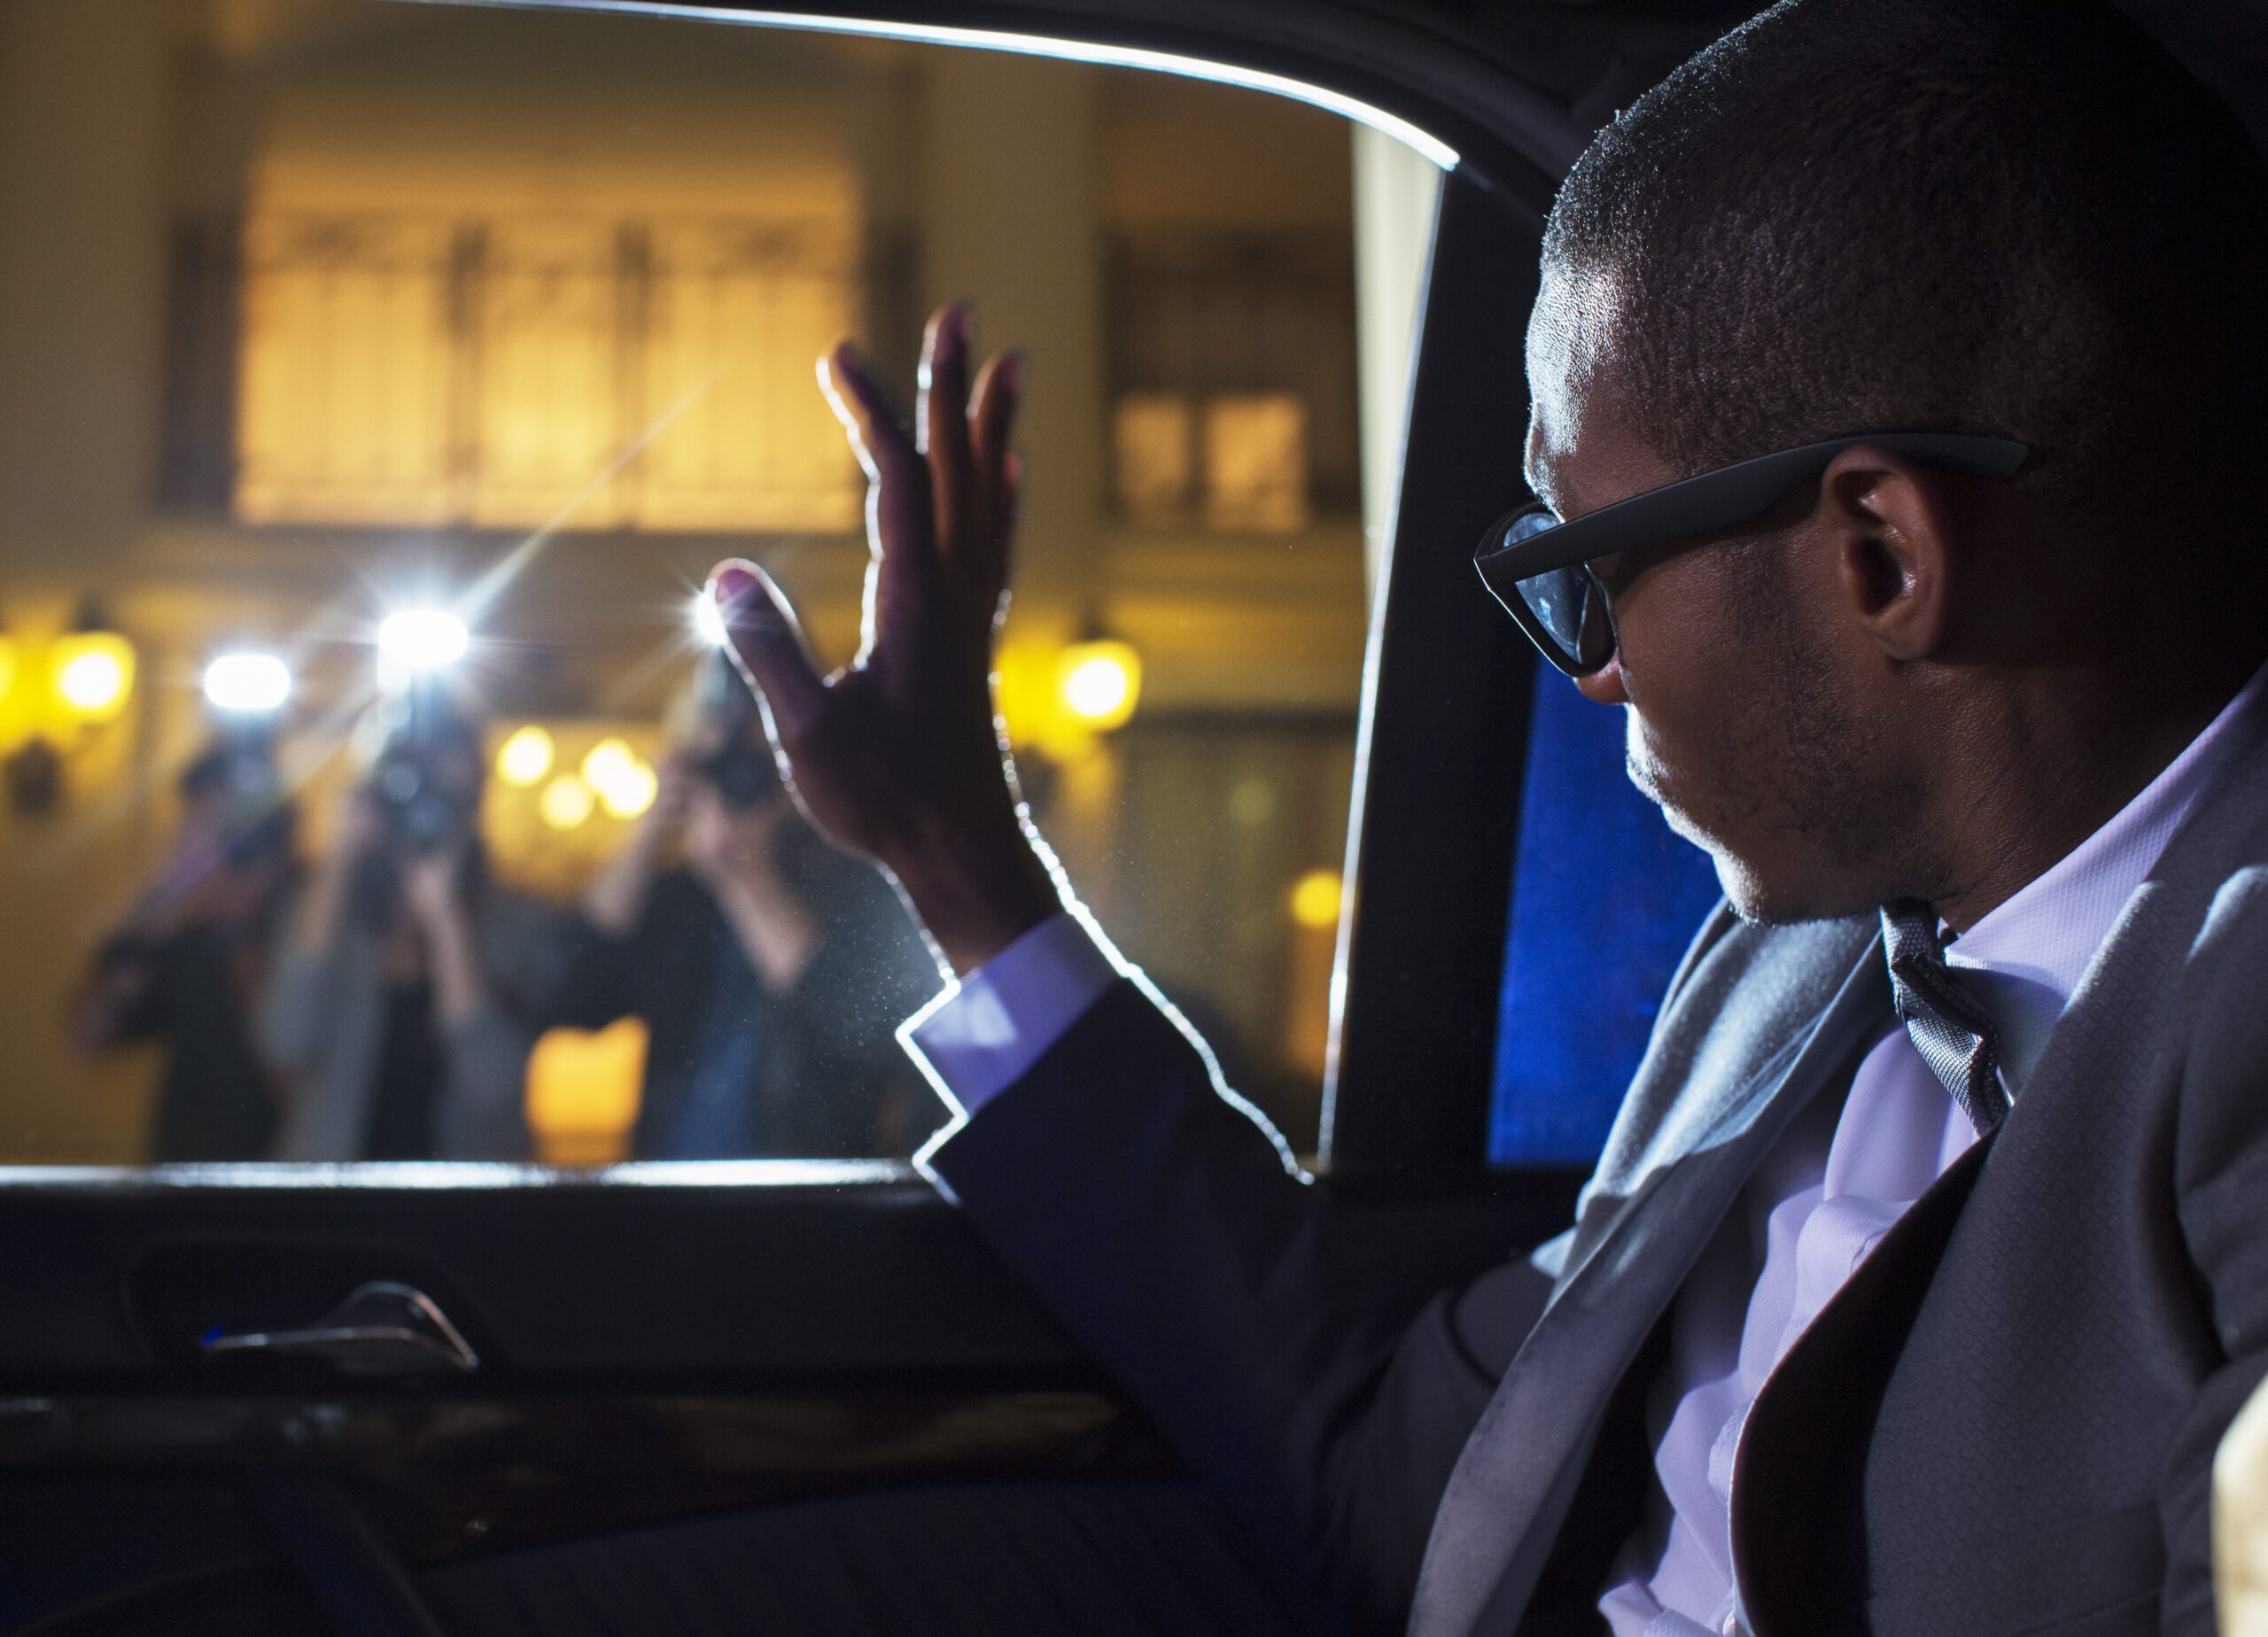 Celebrity in limousine waving at paparazzi photographers